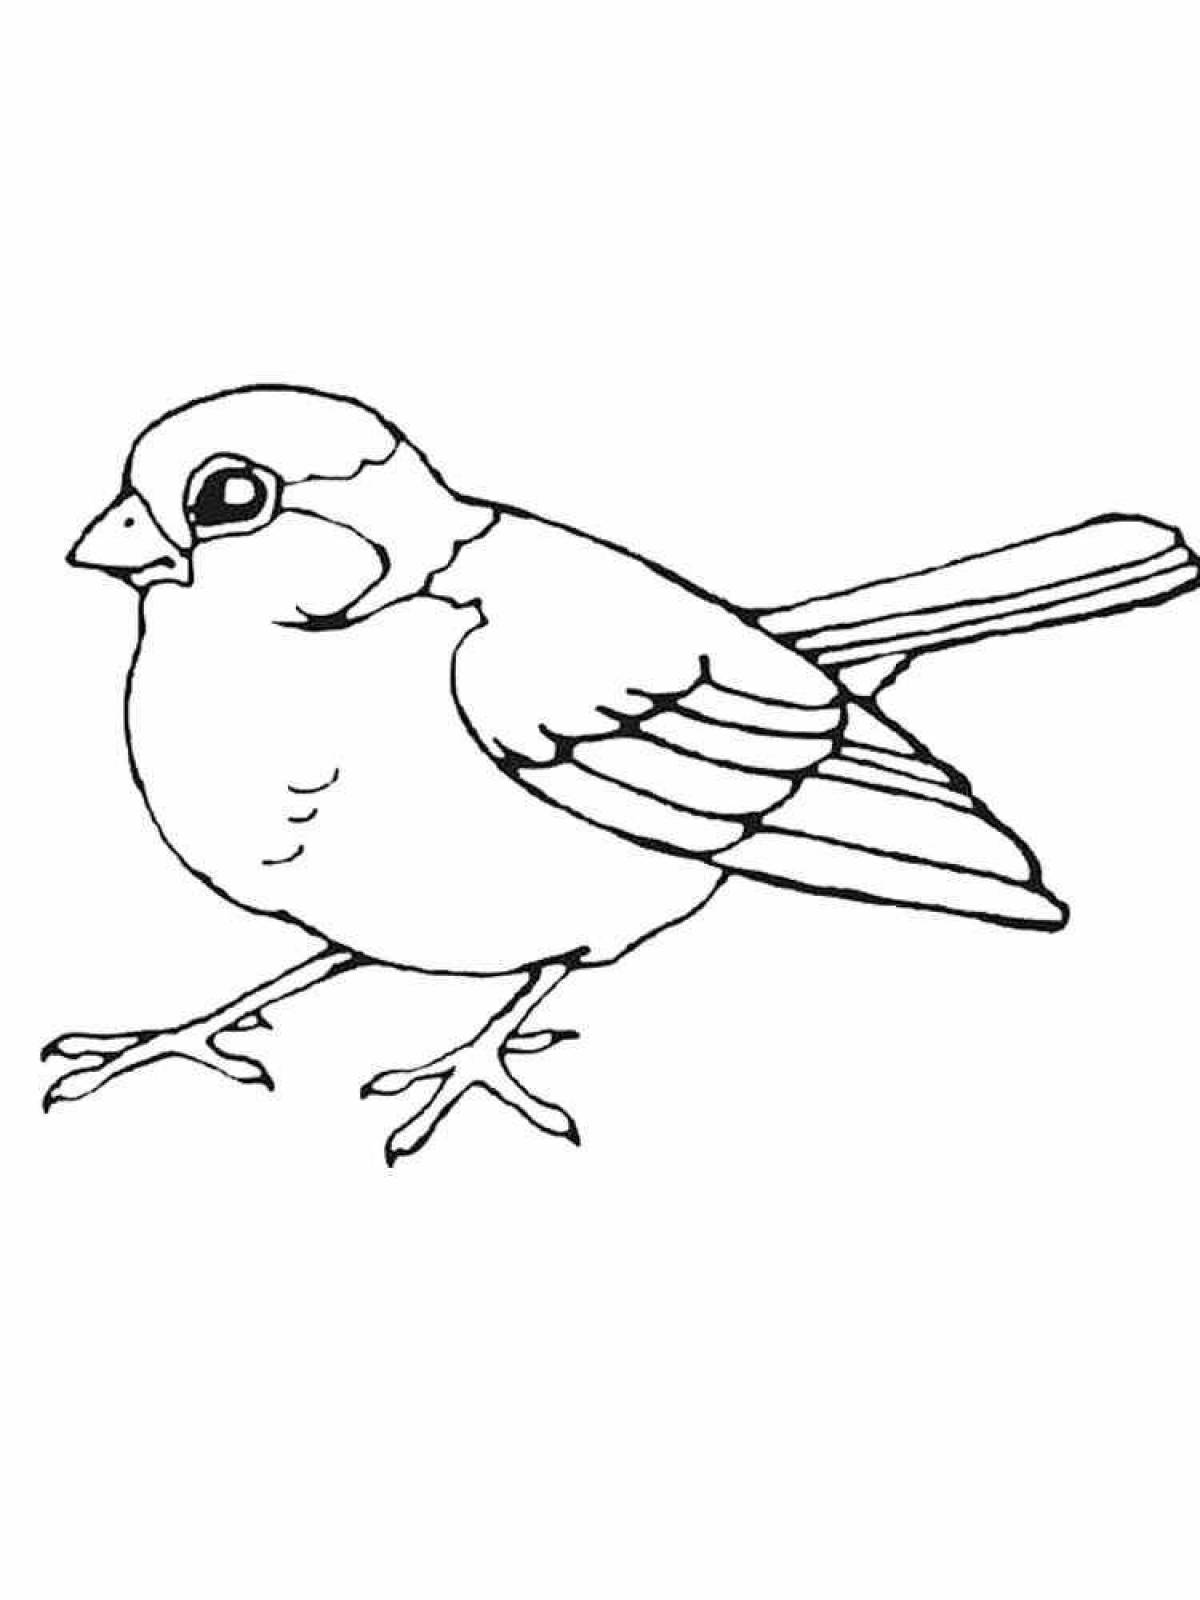 Fantastic sparrow coloring book for kids 6-7 years old